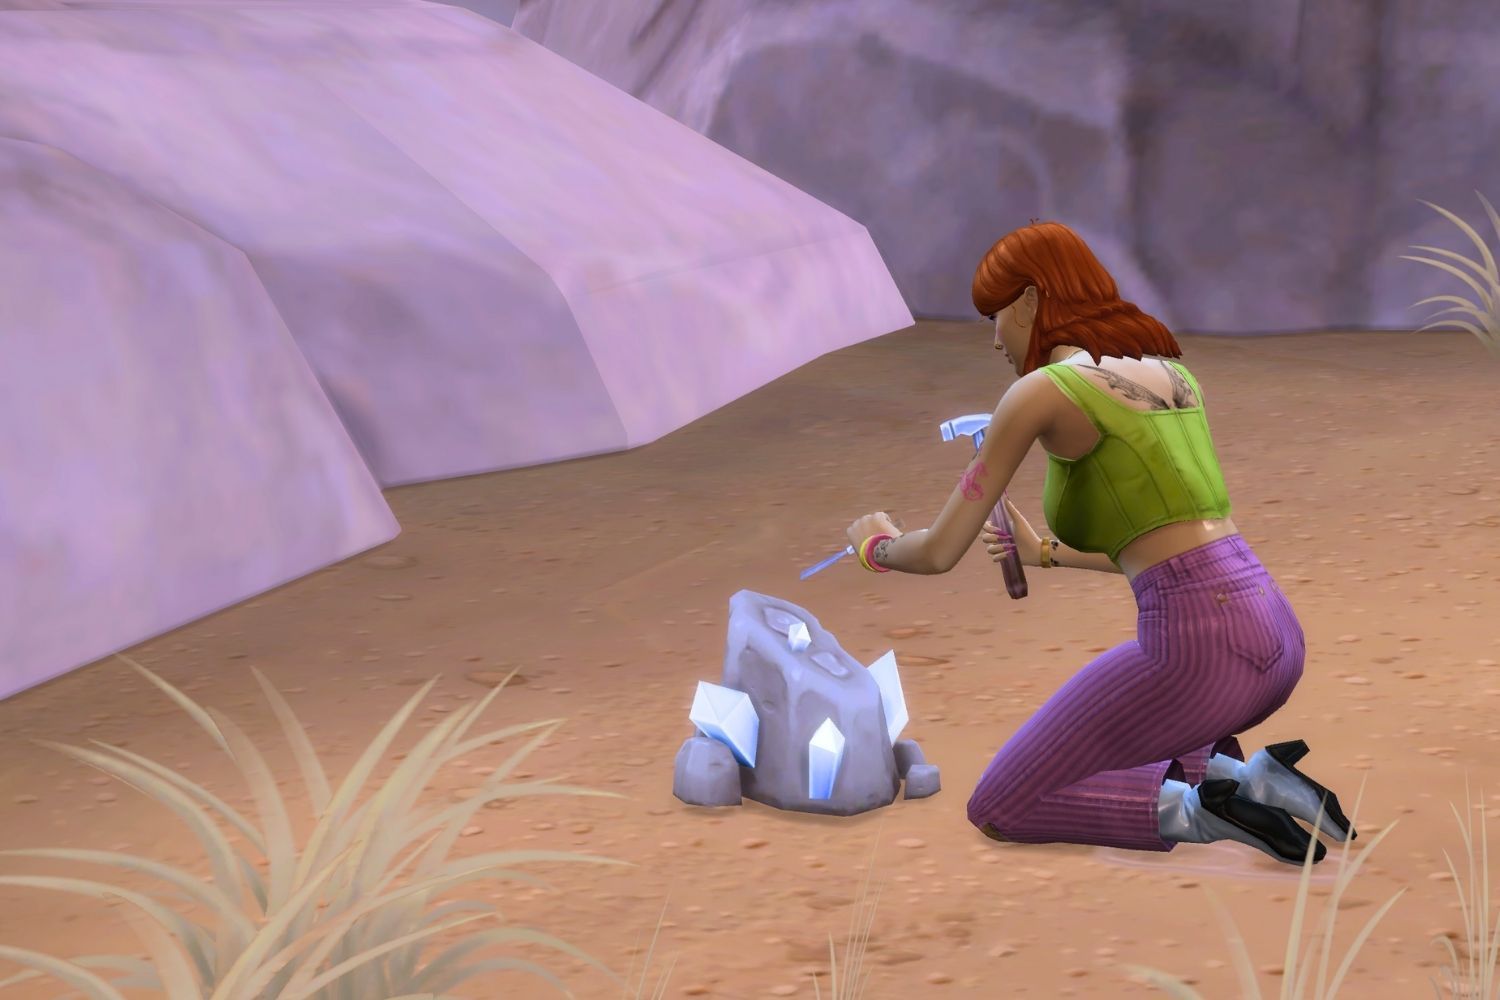 A feminine Sim with red hair uses mining tools to extract materials from a rock.